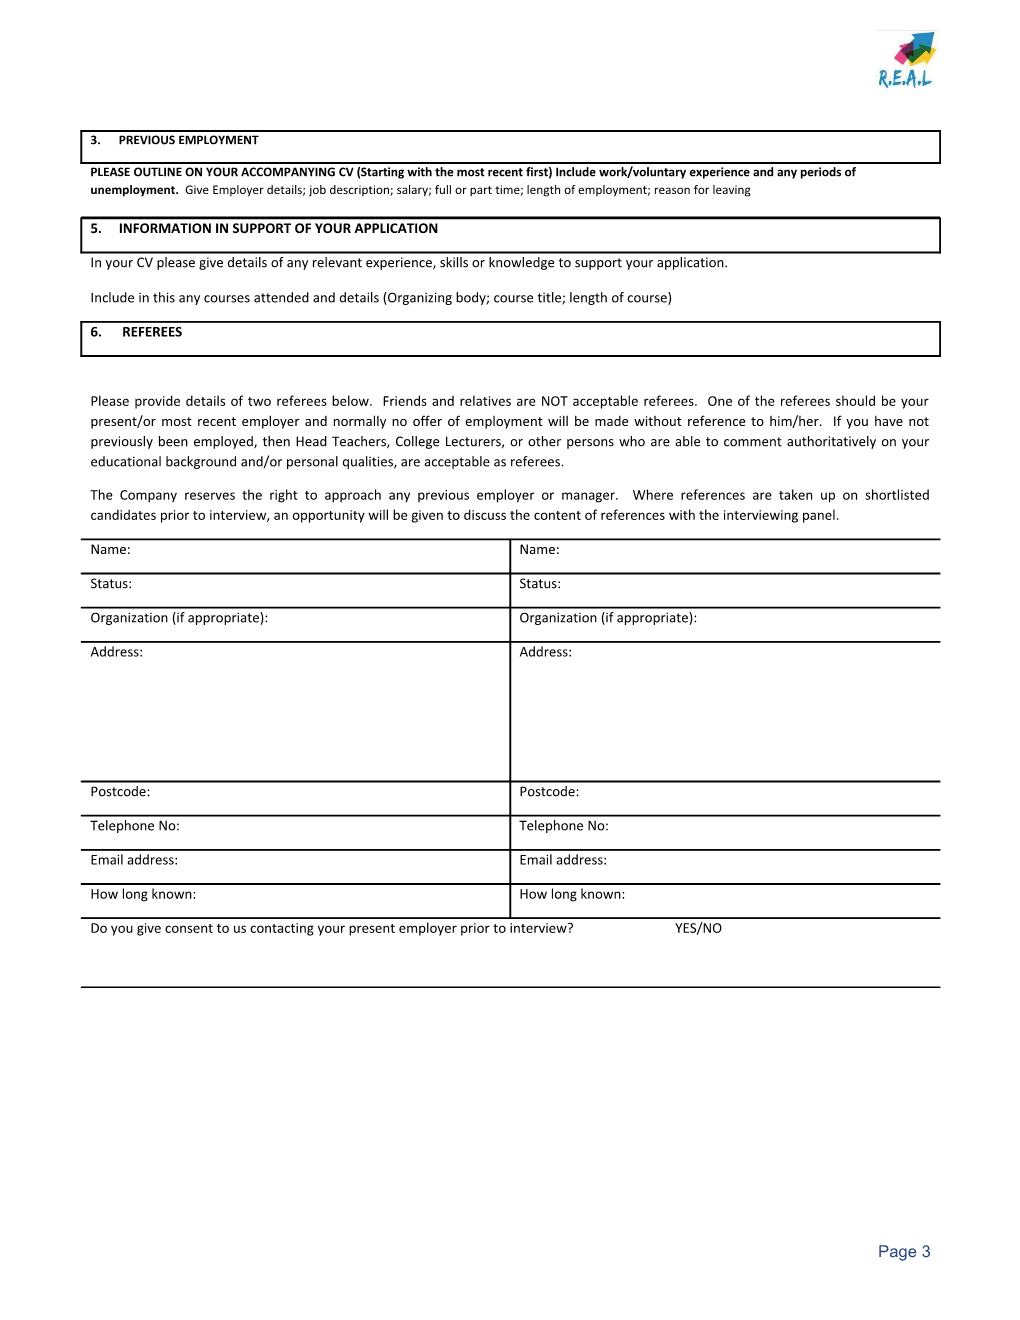 Equal Opportunities Employment Form